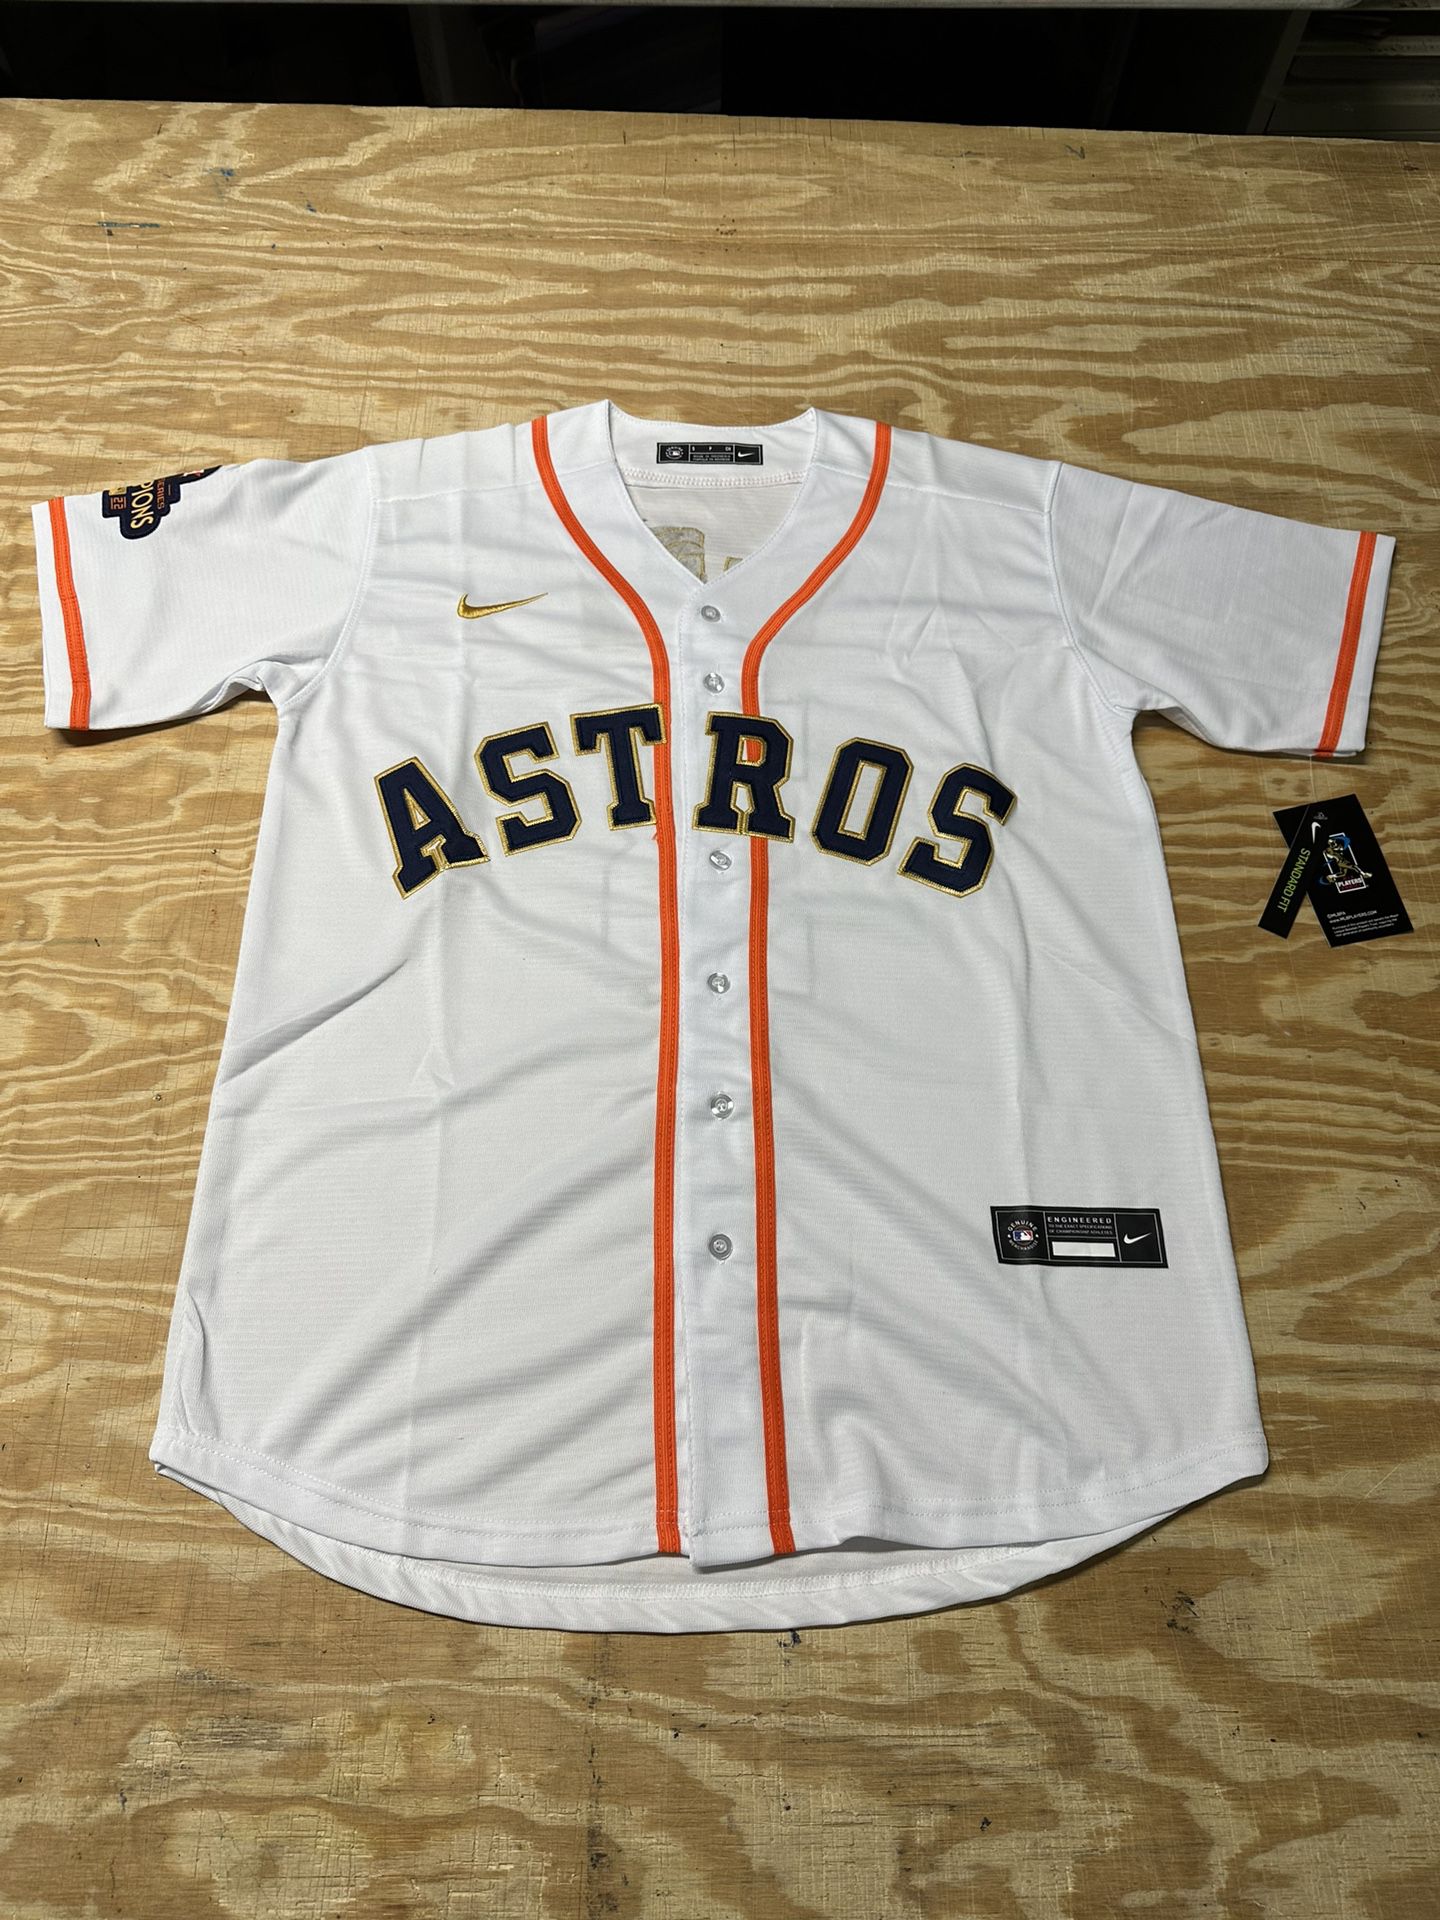 Houston Astros Jerseys (Black, White, Or Space City) for Sale in Webster,  TX - OfferUp